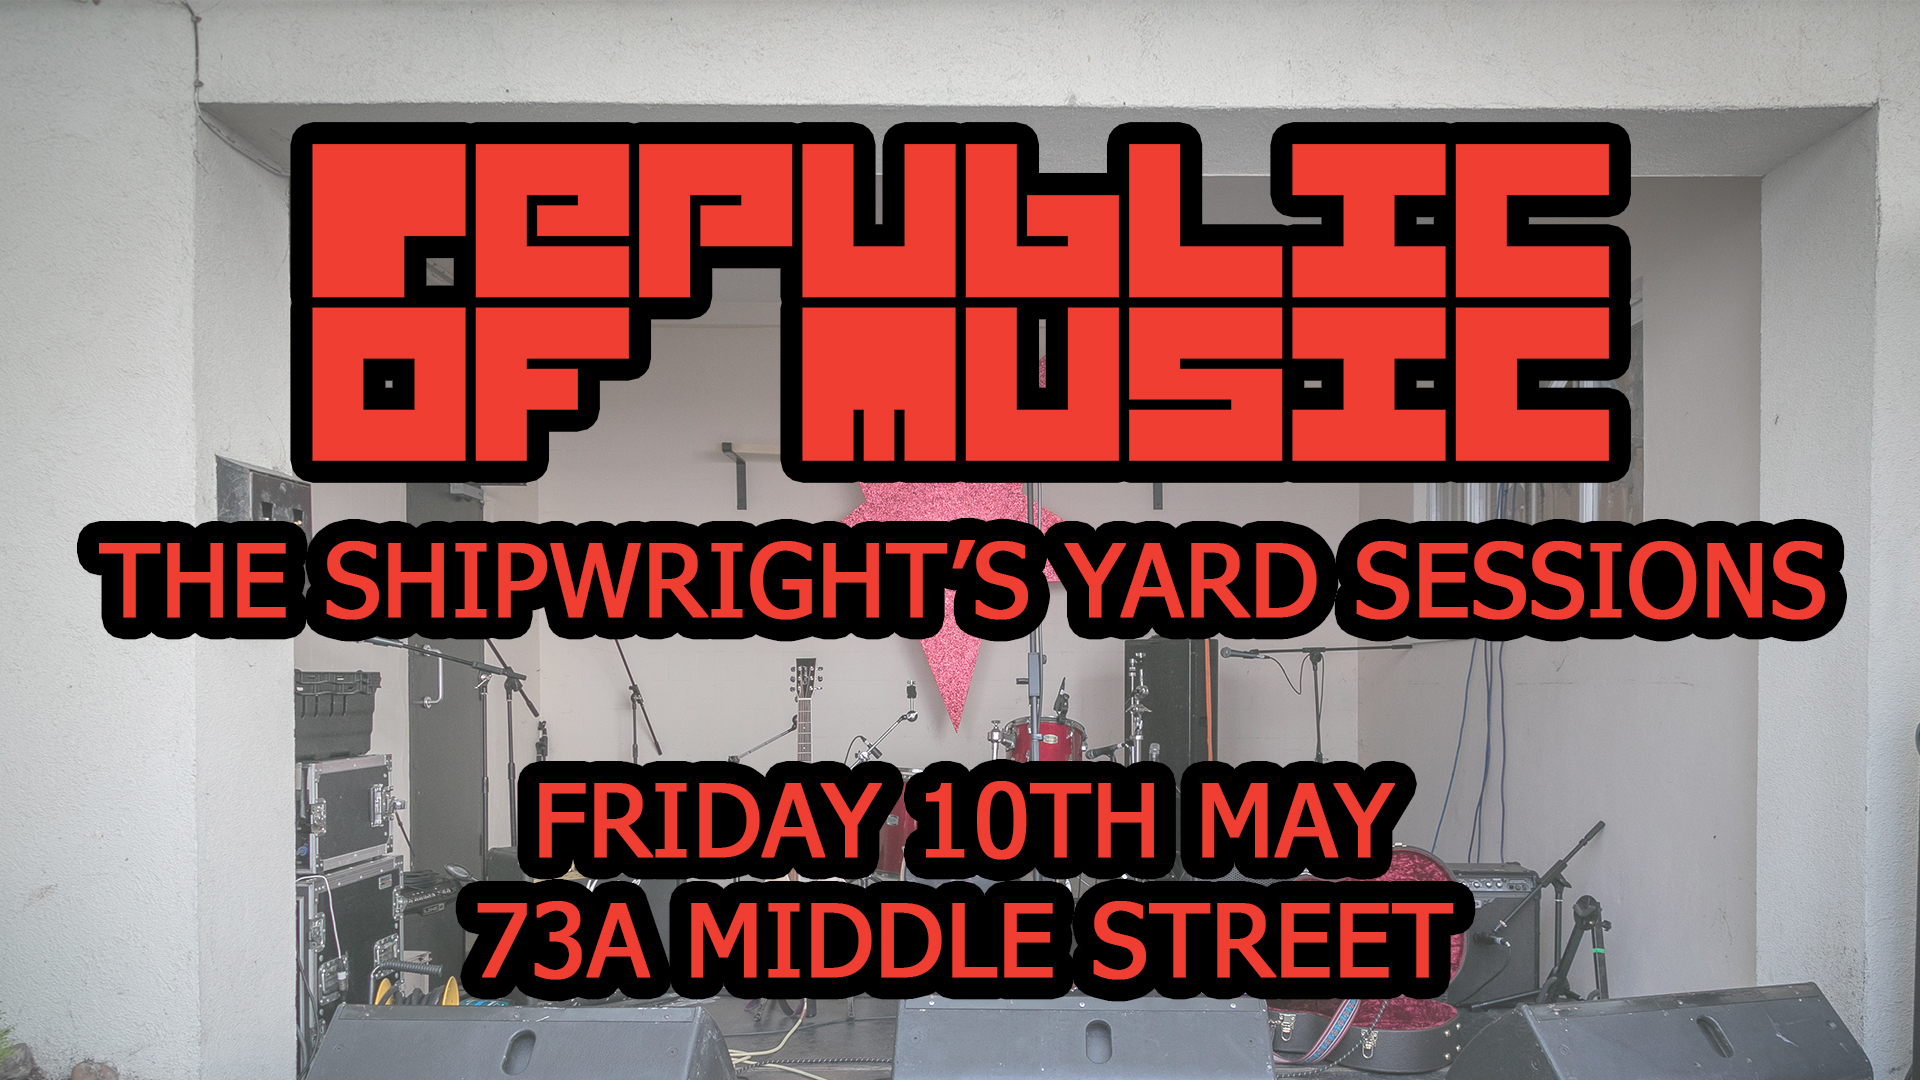 The Shipwrights Yard Sessions 2019 – LINE-UP ANNOUNCED